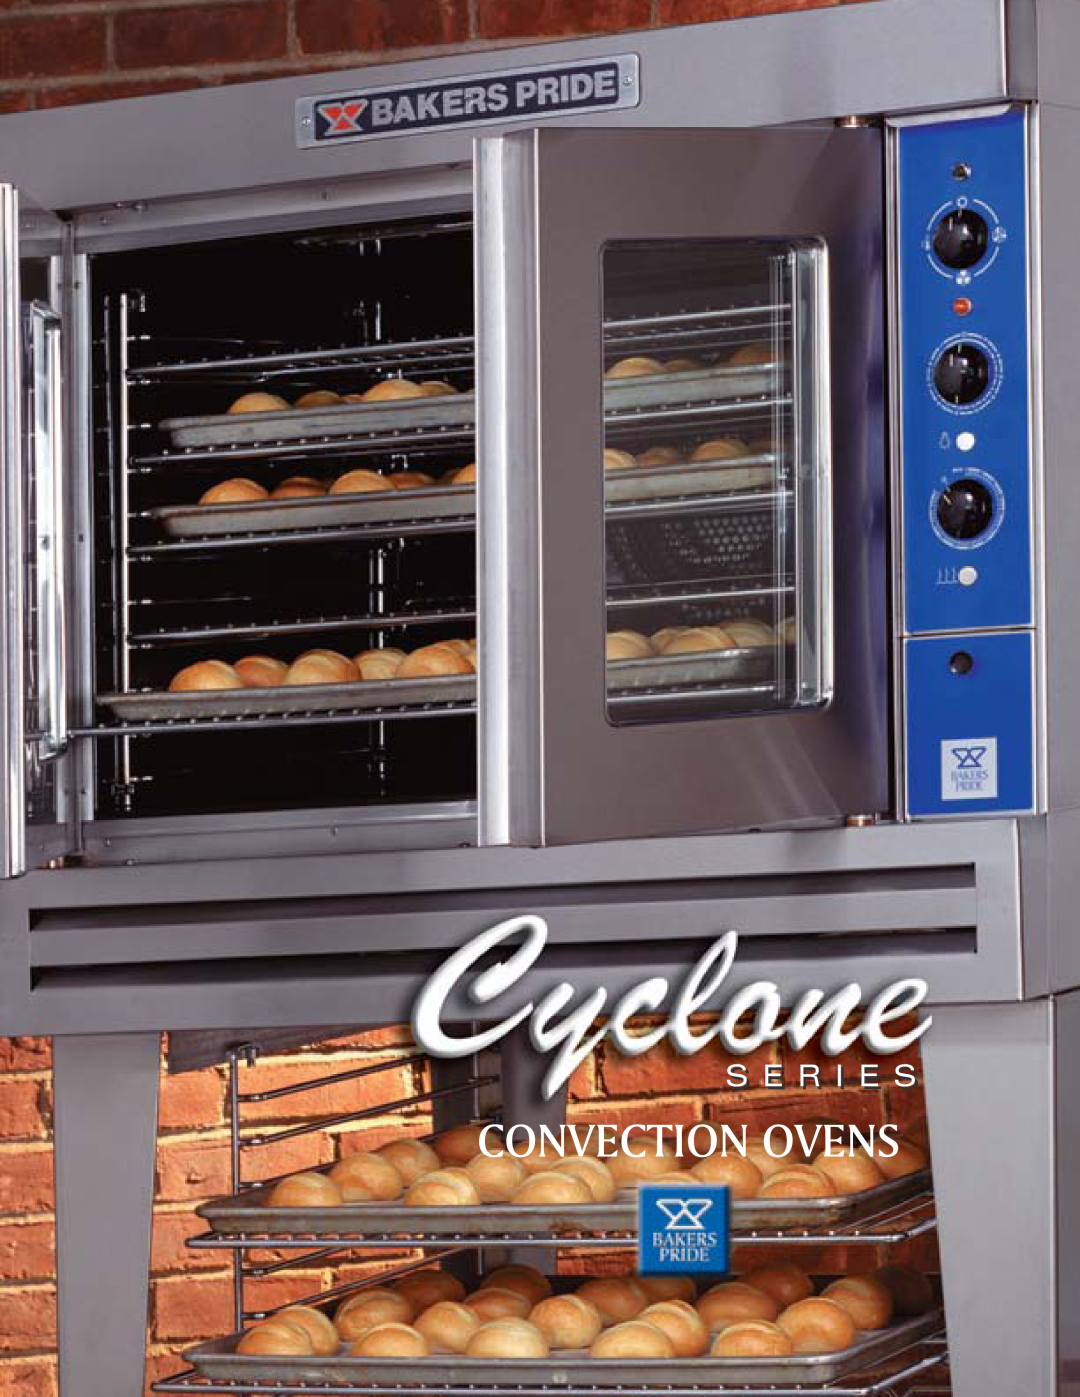 Bakers Pride Oven CO11 manual Convection Ovens, S E R Ii E S 